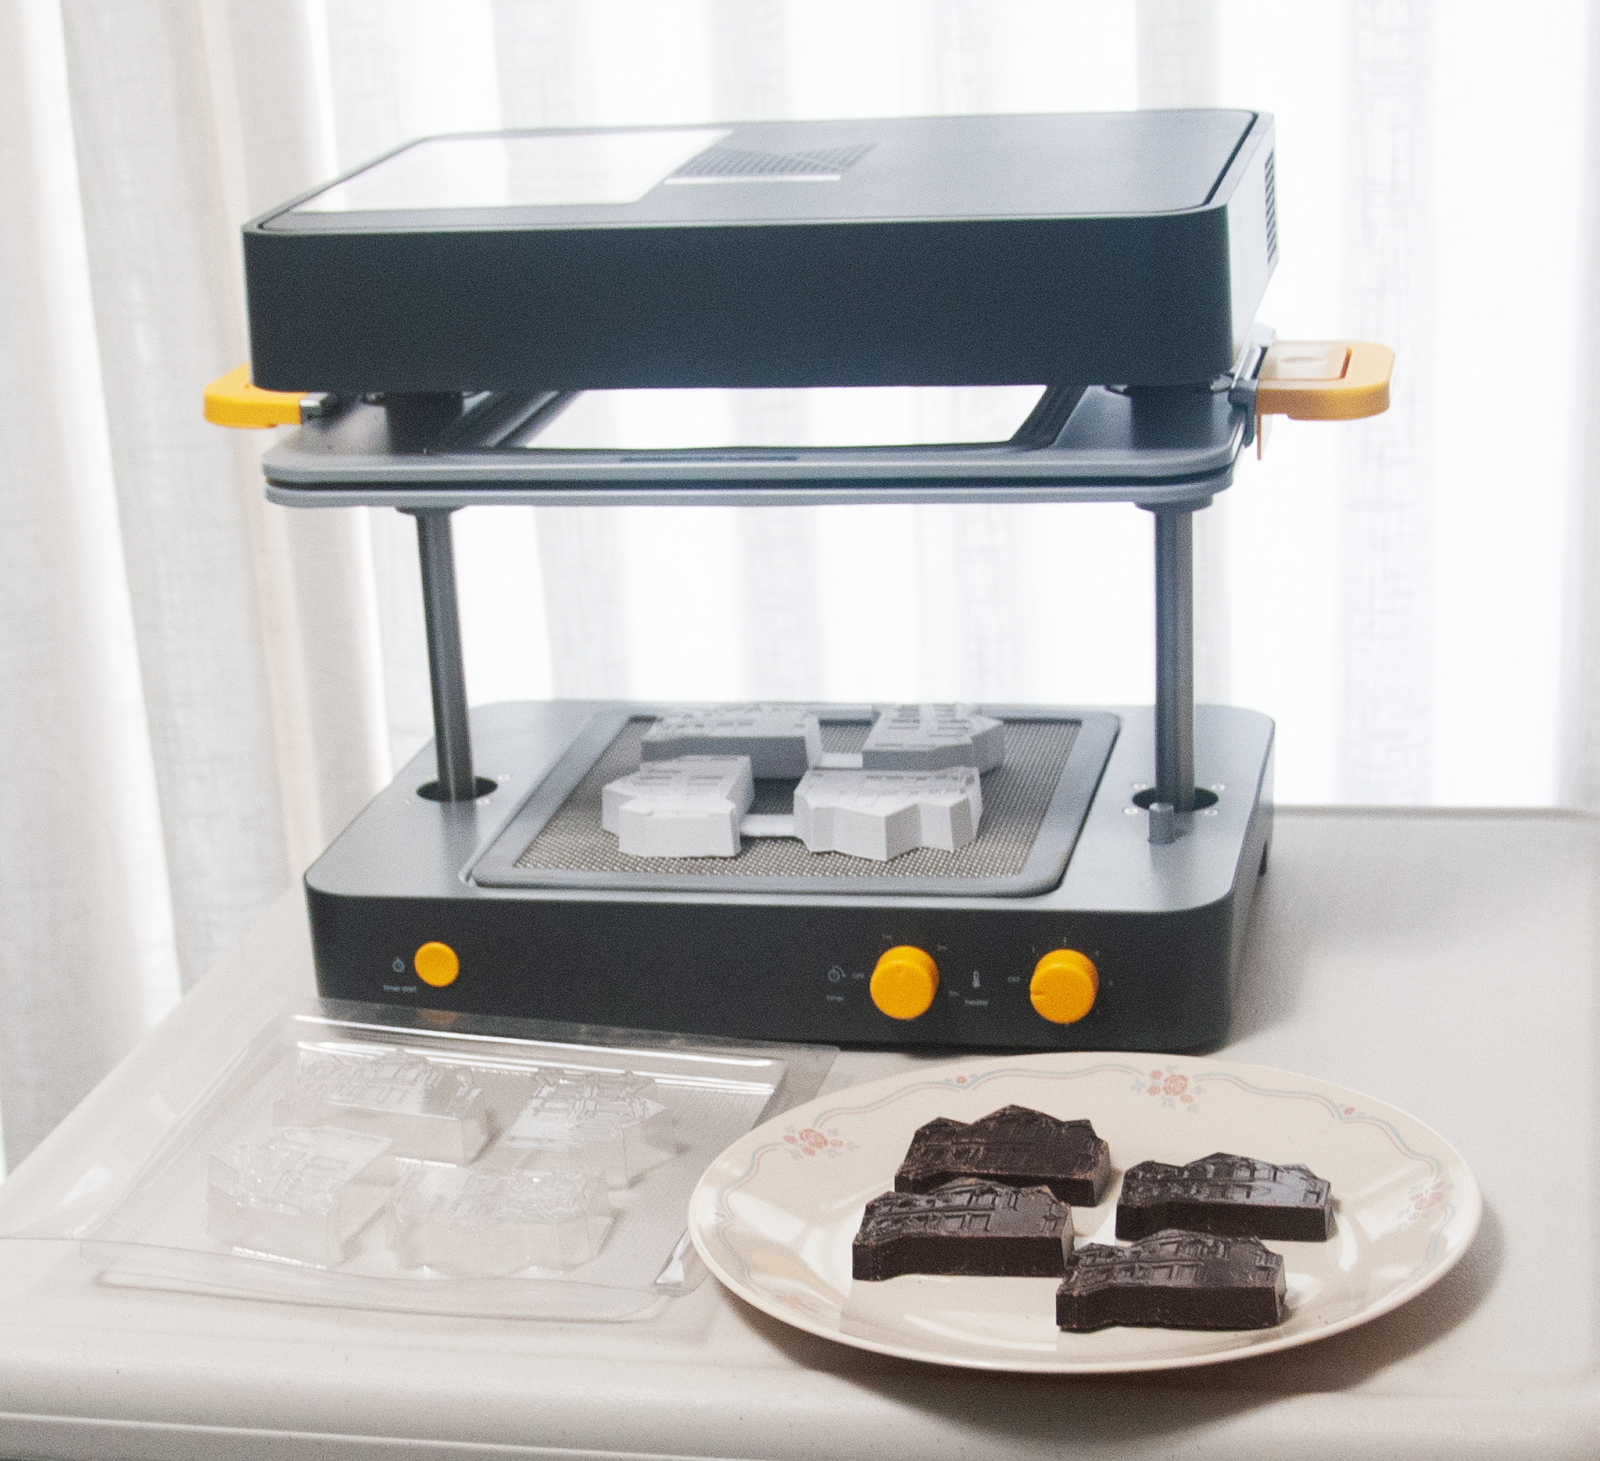 Creating Chocolate Molds with 3D Printing and Vacuum Forming